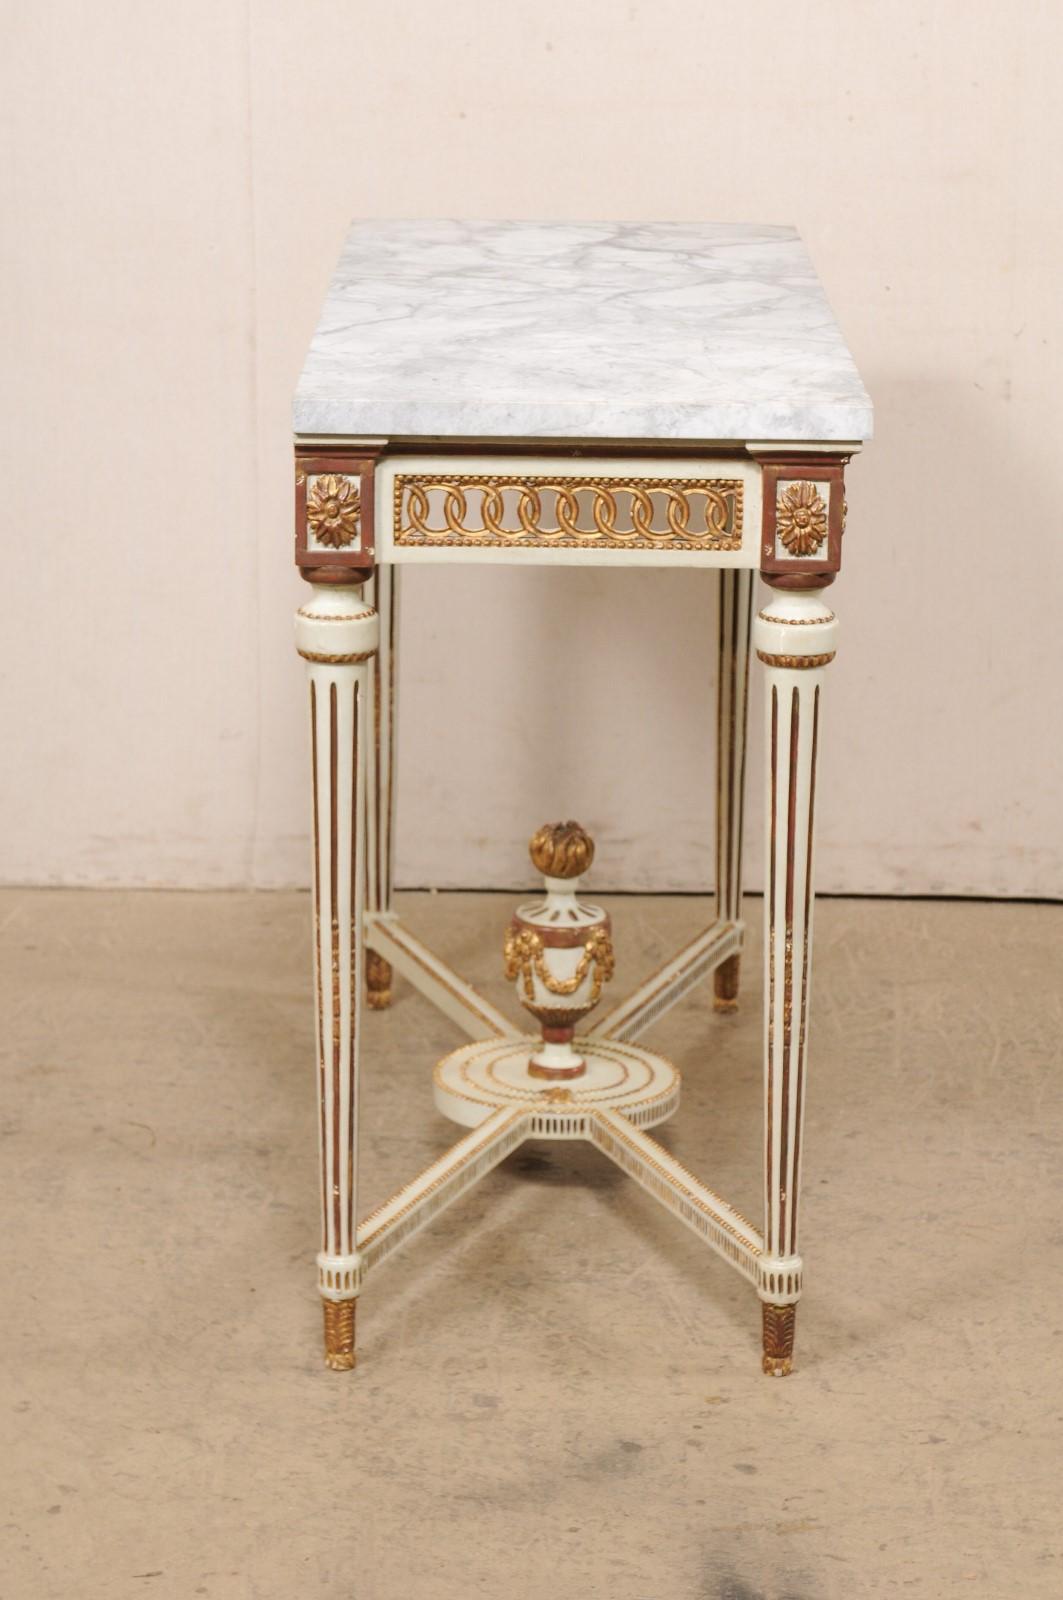 Italian Marble Top Console w/Pierce-Carved Apron & Large Urn Finial at Underside For Sale 2